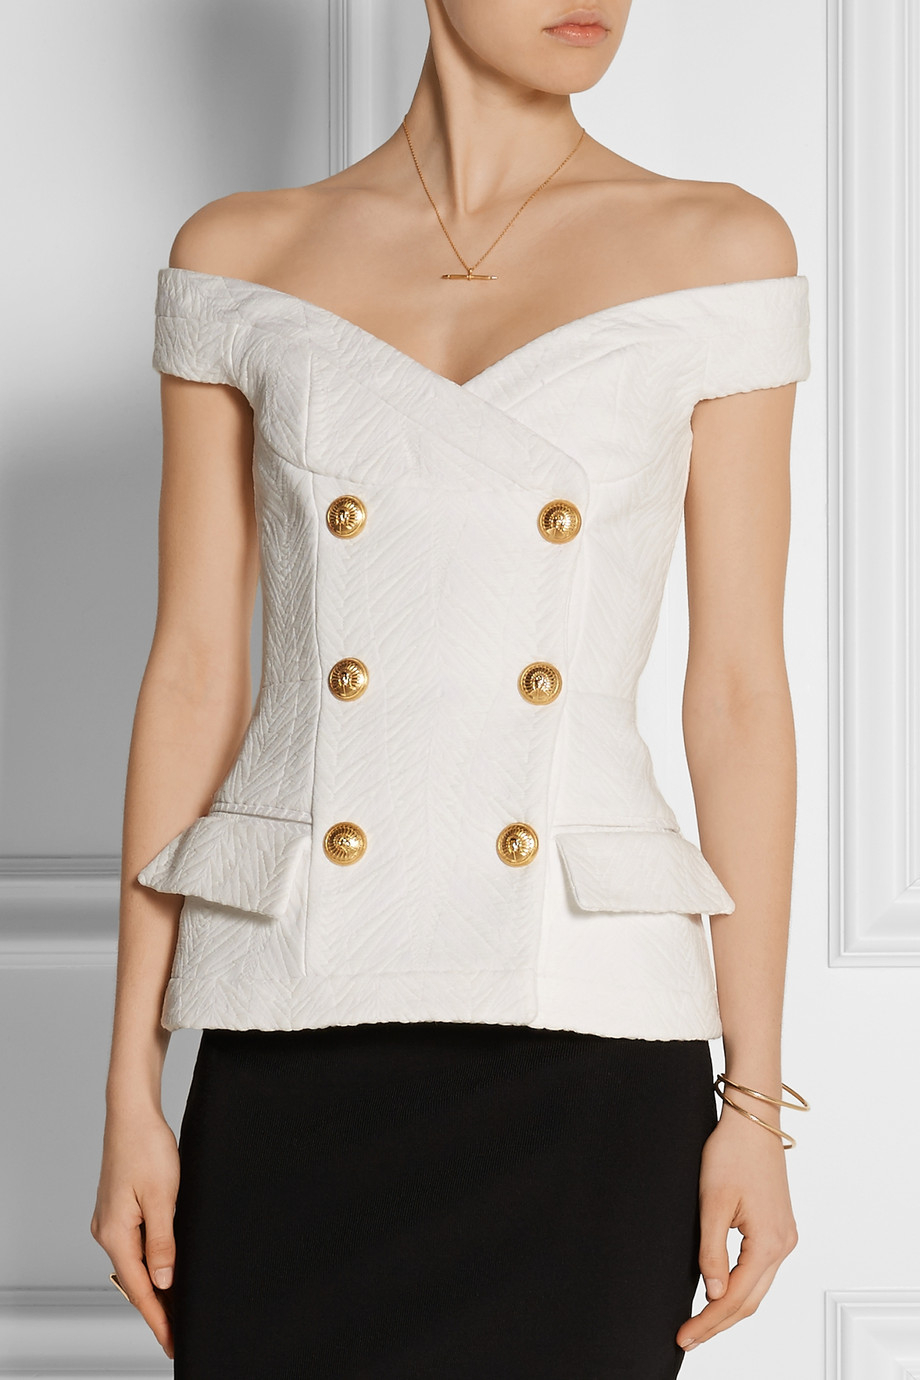 Lyst - Balmain Off-The-Shoulder Jacquard Top in White